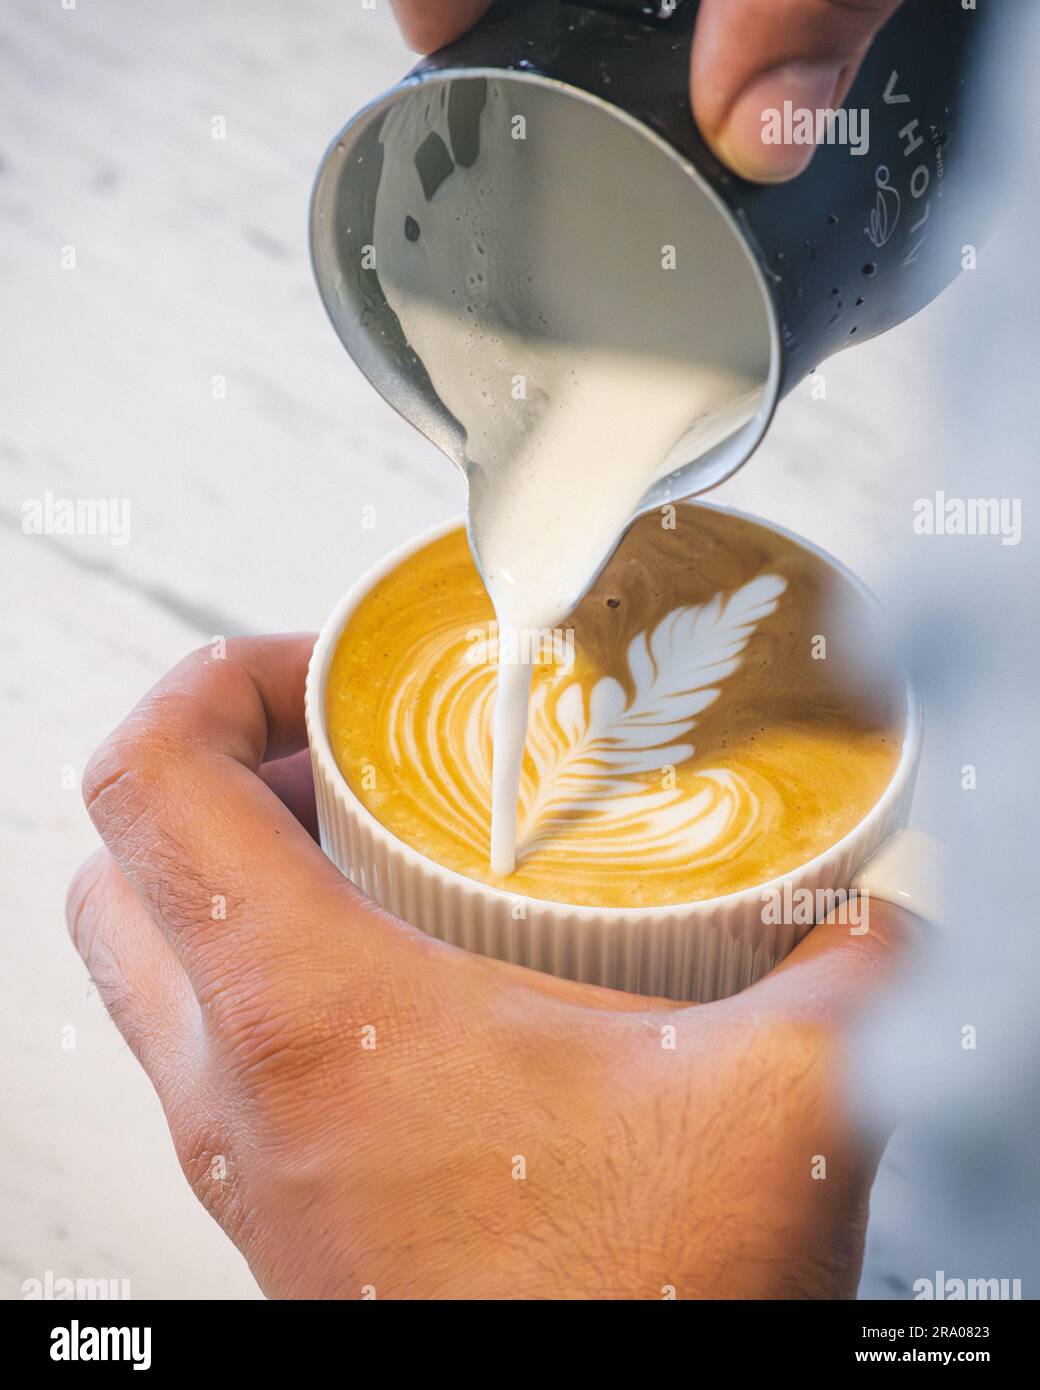 Latte art – how to be creative?